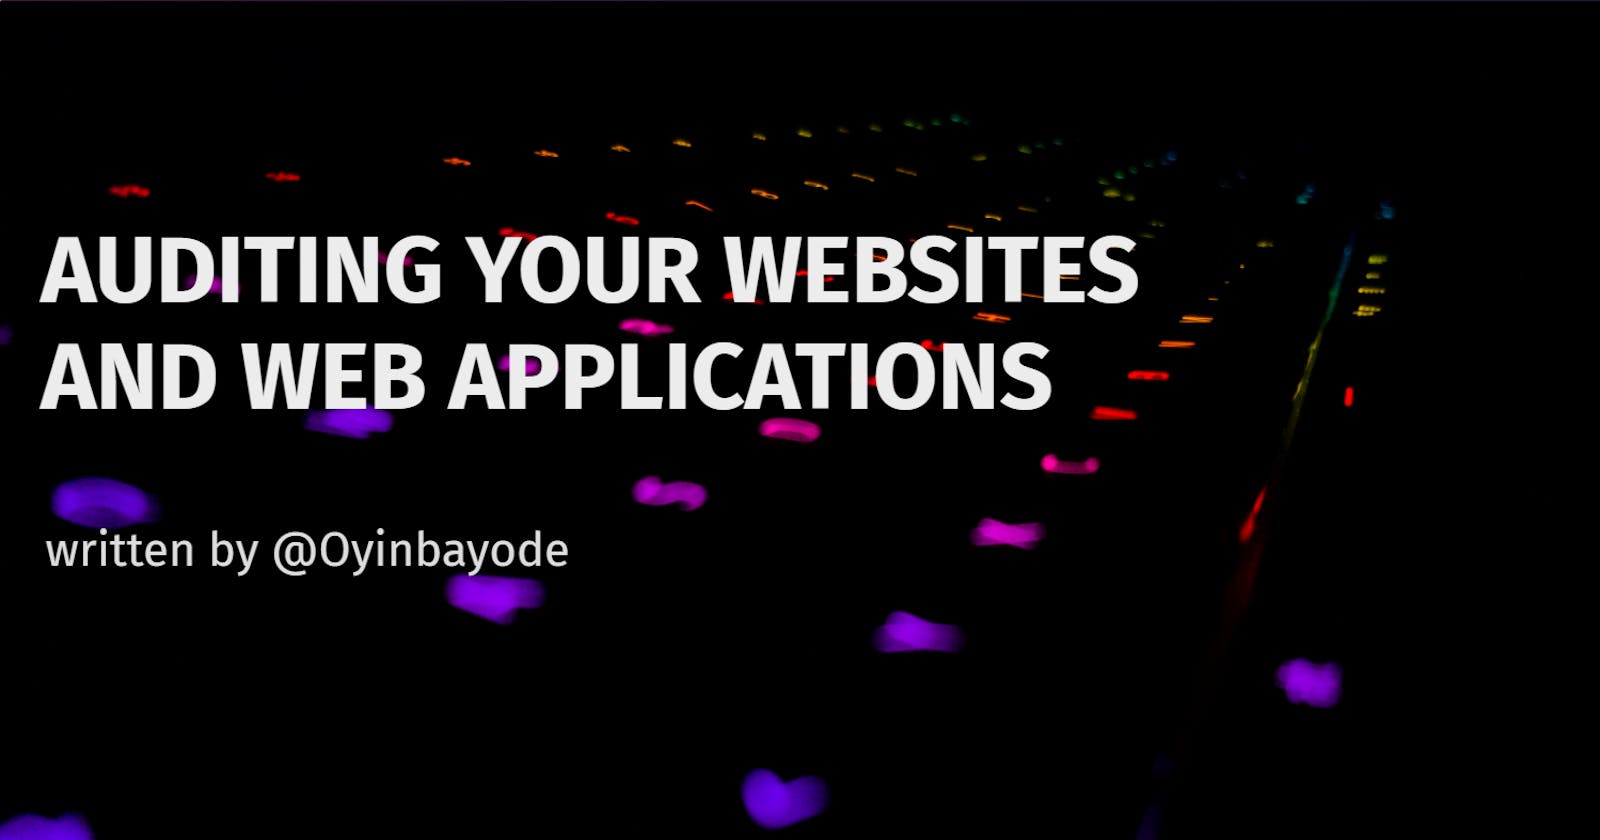 Auditing Your Websites And Web Applications